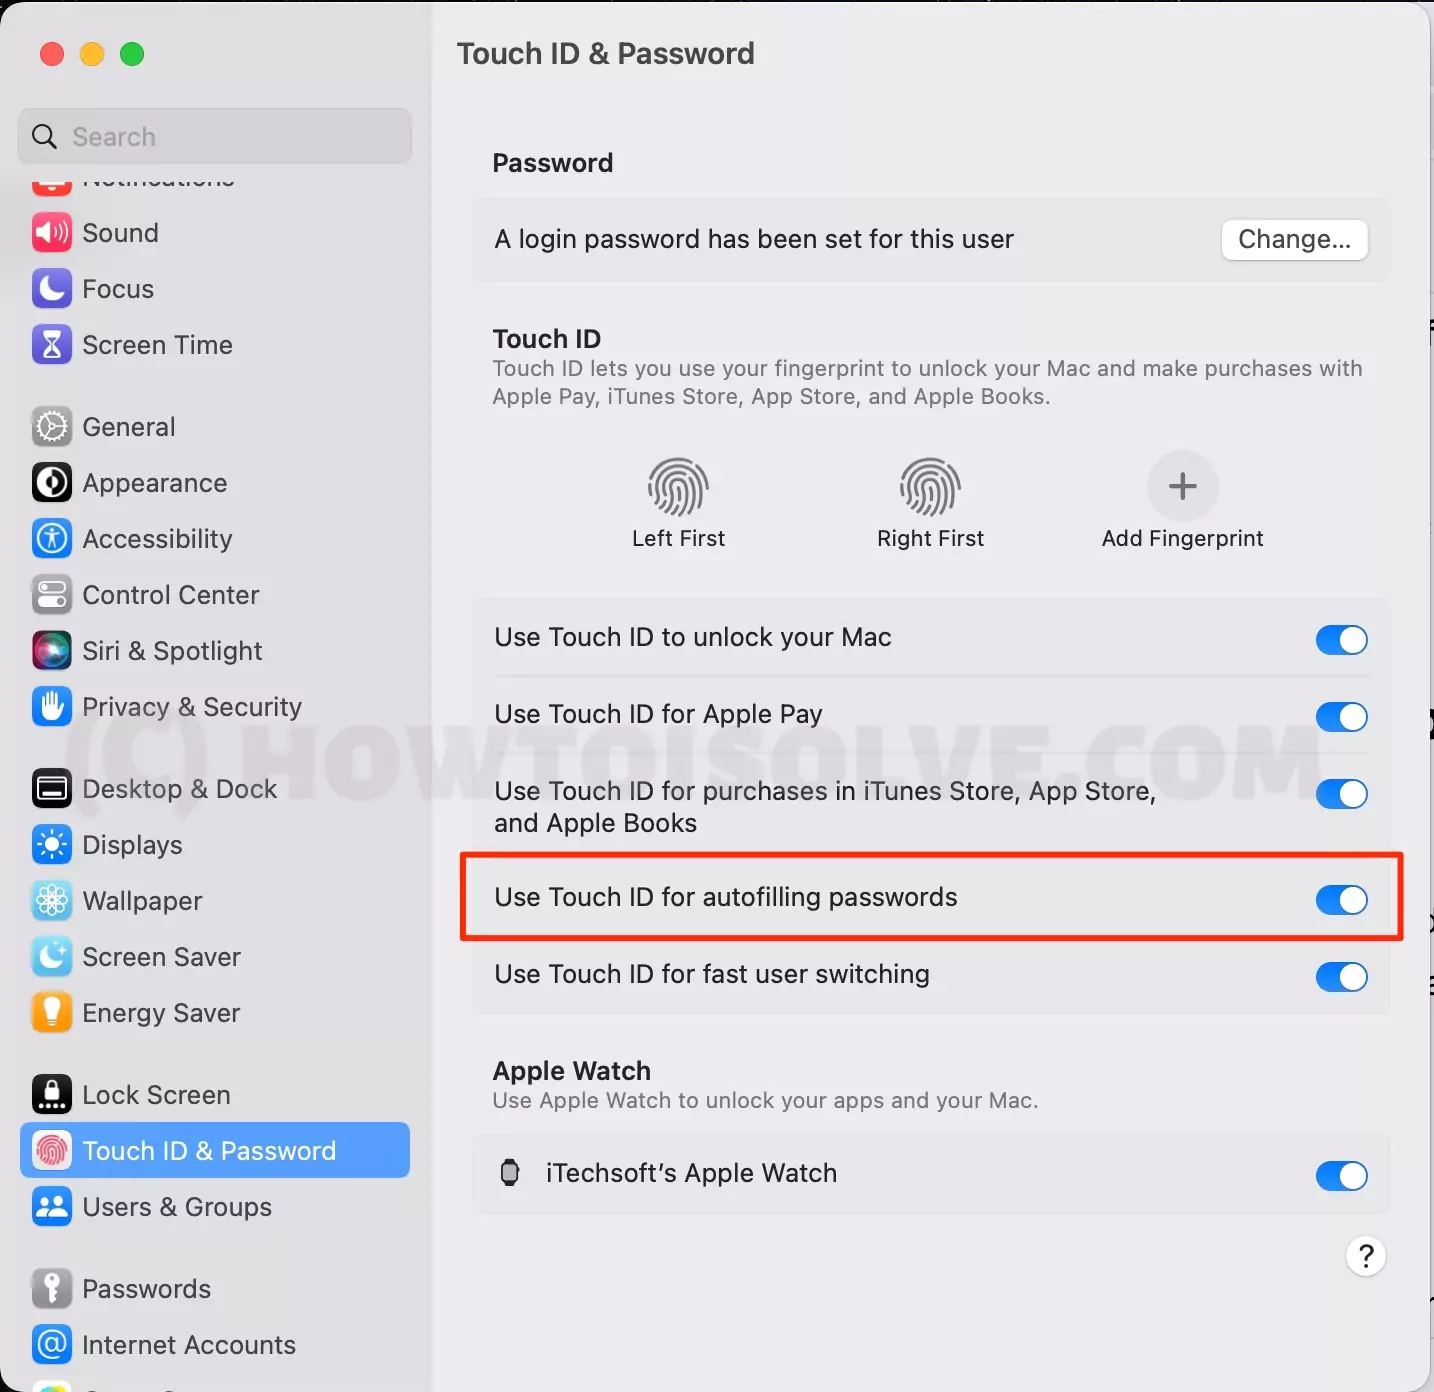 use-touch-id-for-autofilling-passwords-on-mac-in-ventura